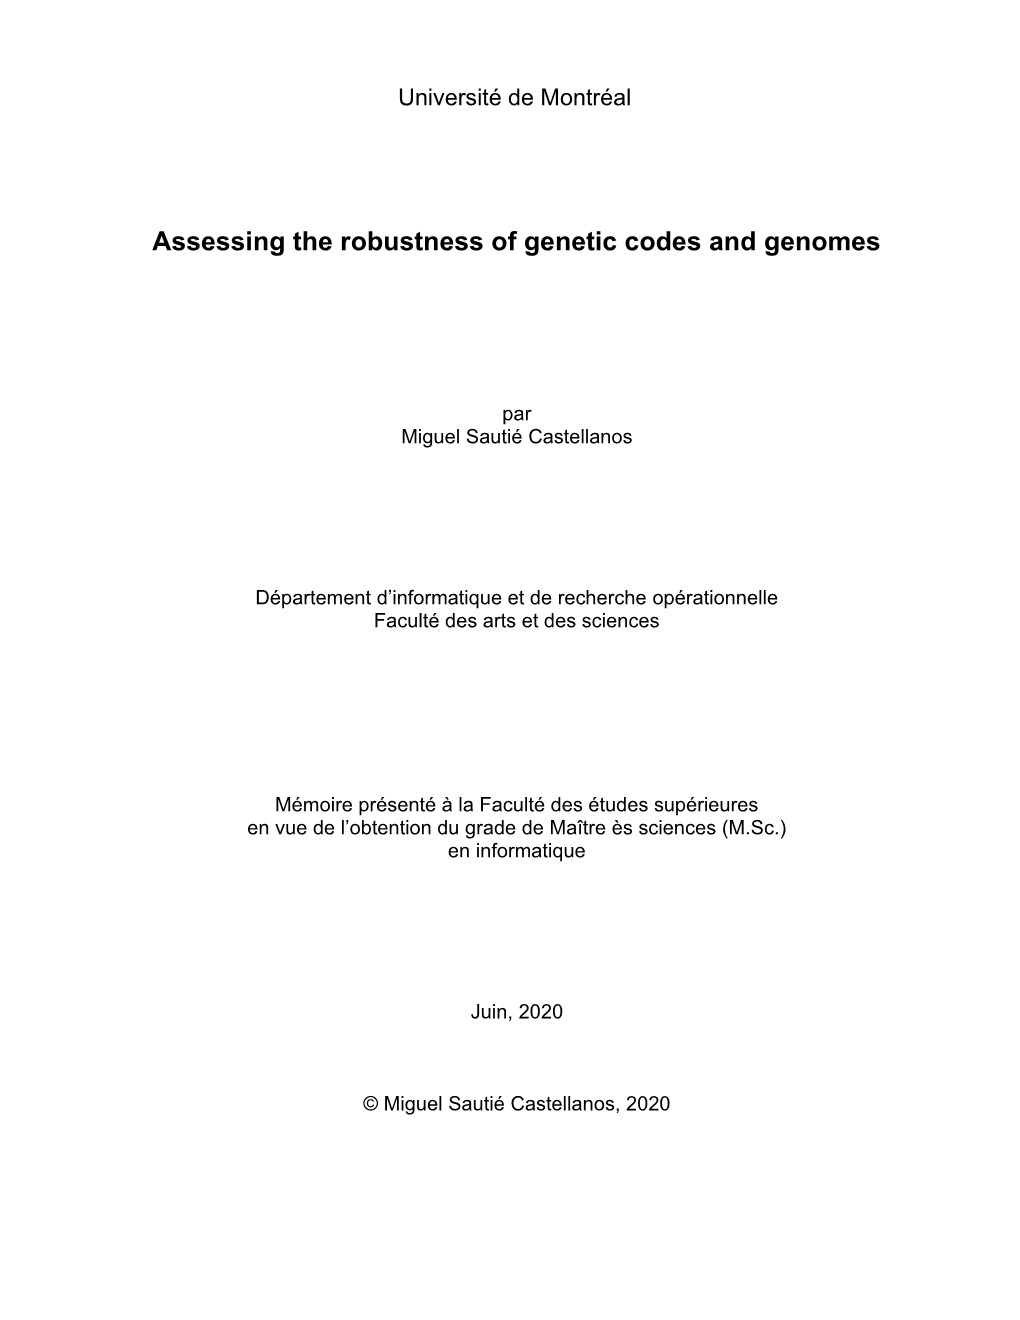 Assessing the Robustness of Genetic Codes and Genomes